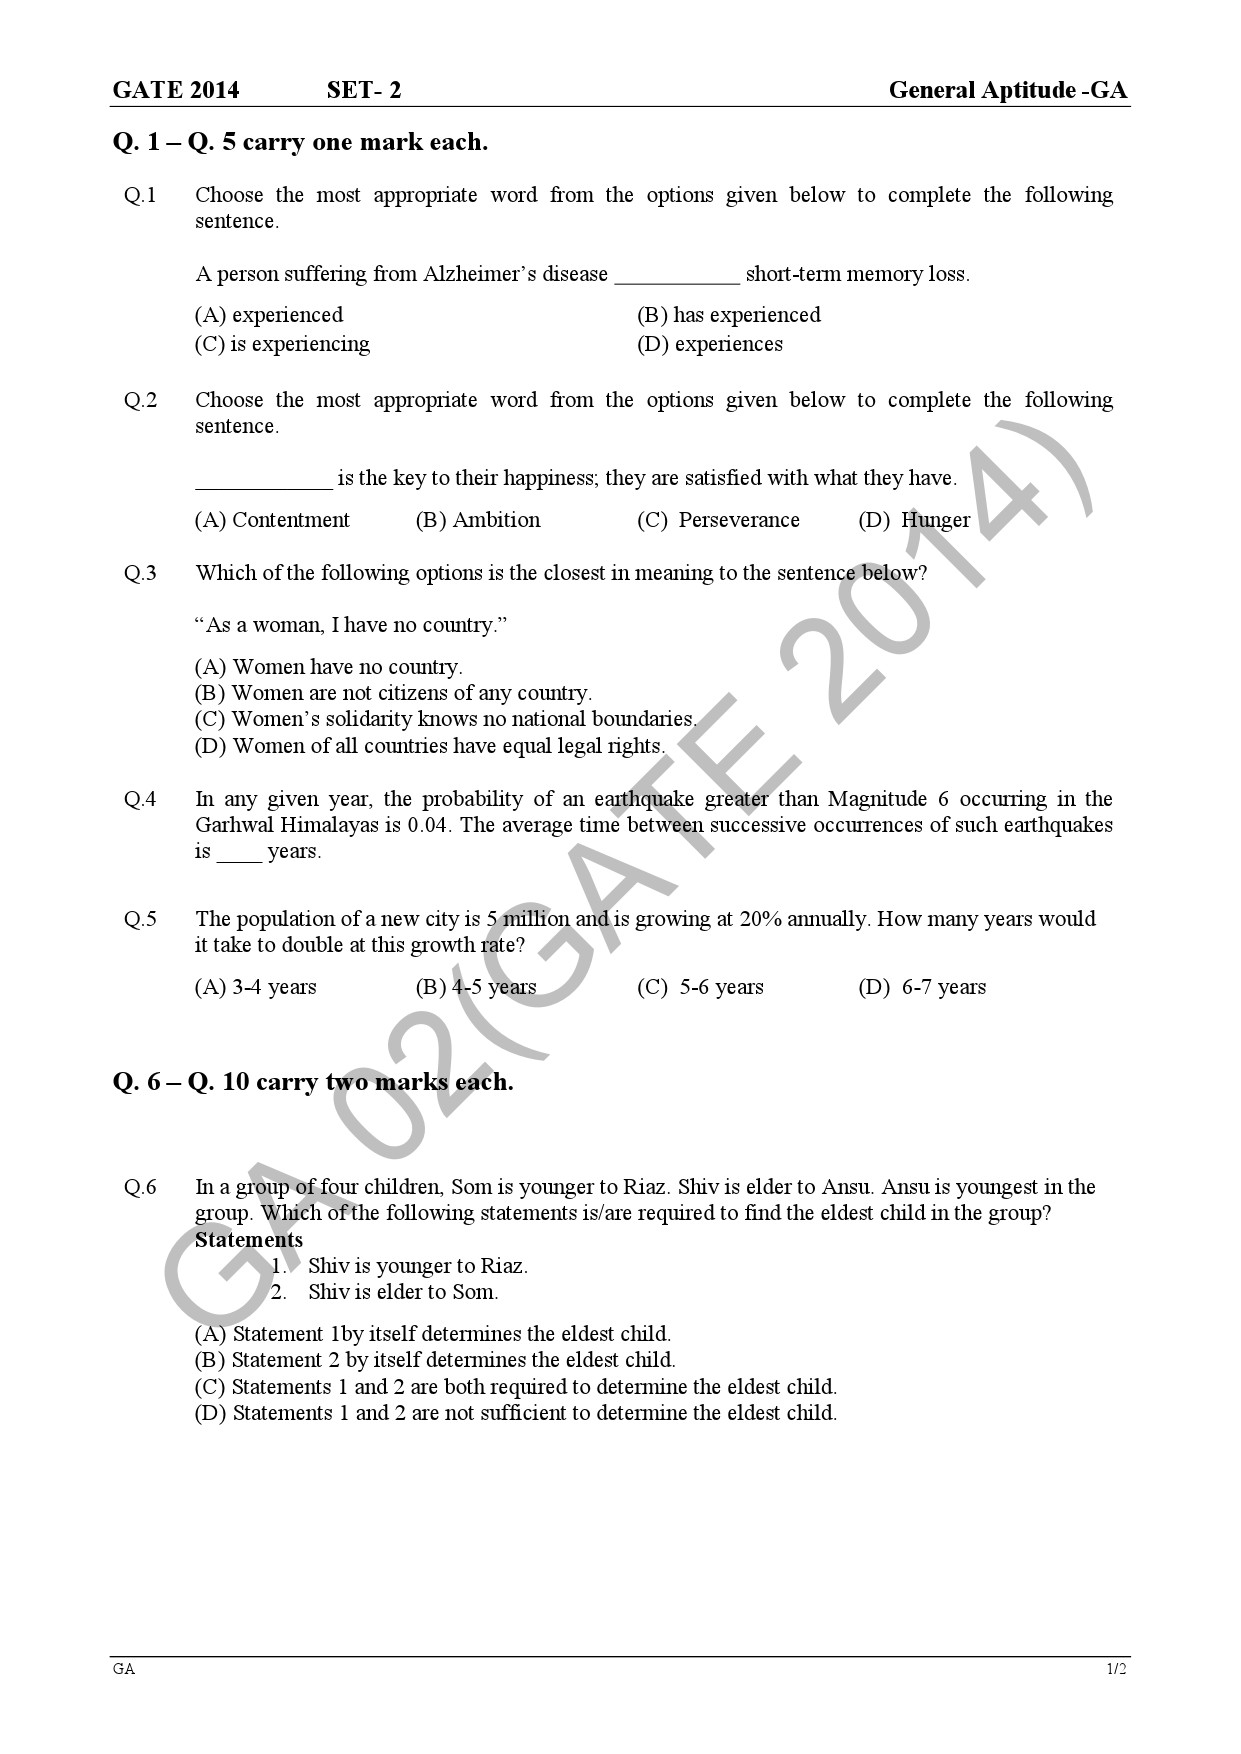 GATE Exam Question Paper 2014 Biotechnology 5